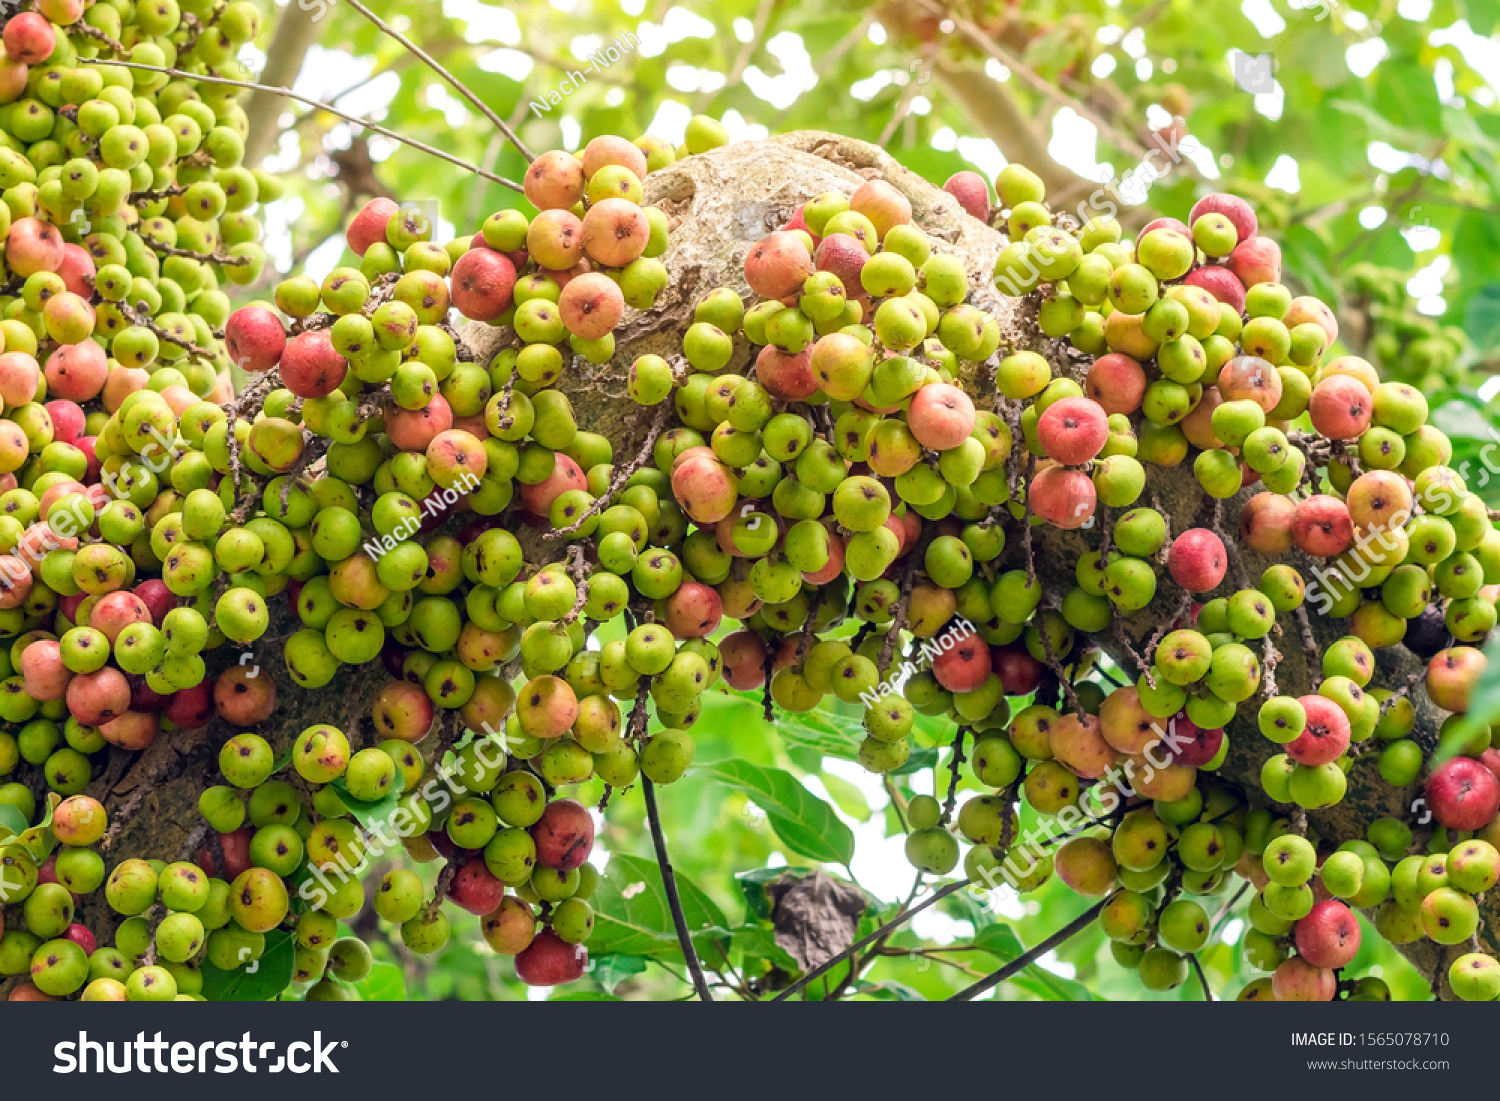 Common fig (Ficus carica) green and red fruits on ficus subpisocarpa tree in outdoor. Fruit on ficus subpisocarpa also known as fig is one of main foods of wild animals. #1565078710